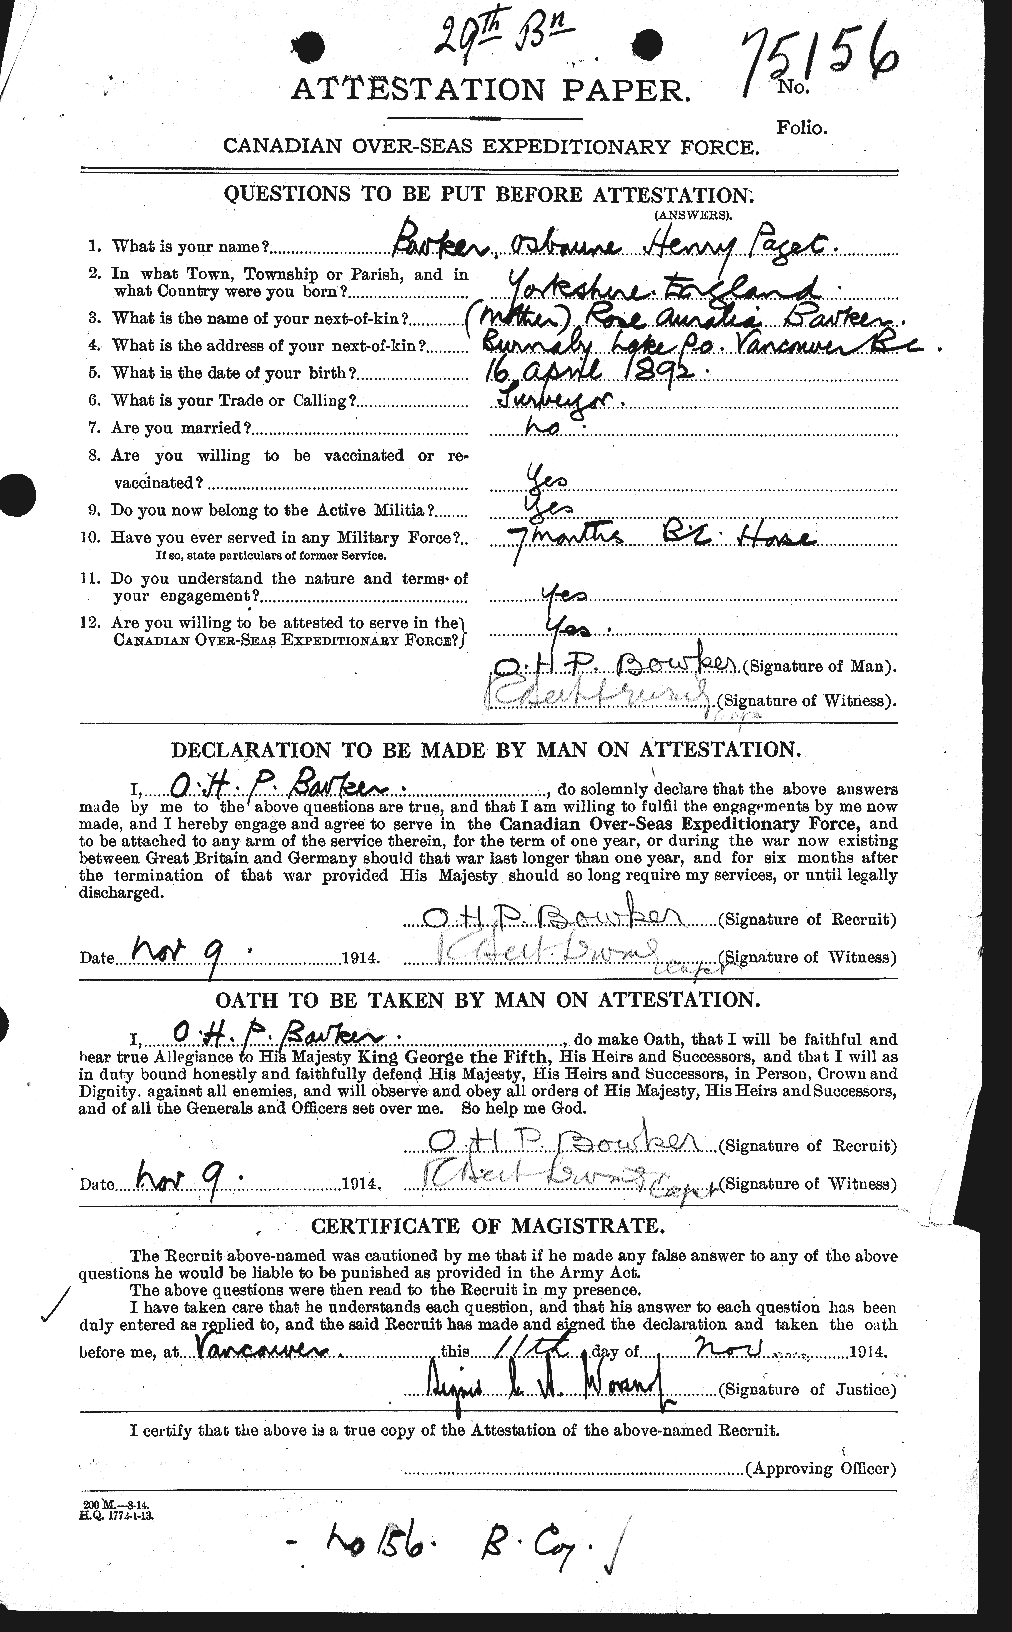 Personnel Records of the First World War - CEF 253771a